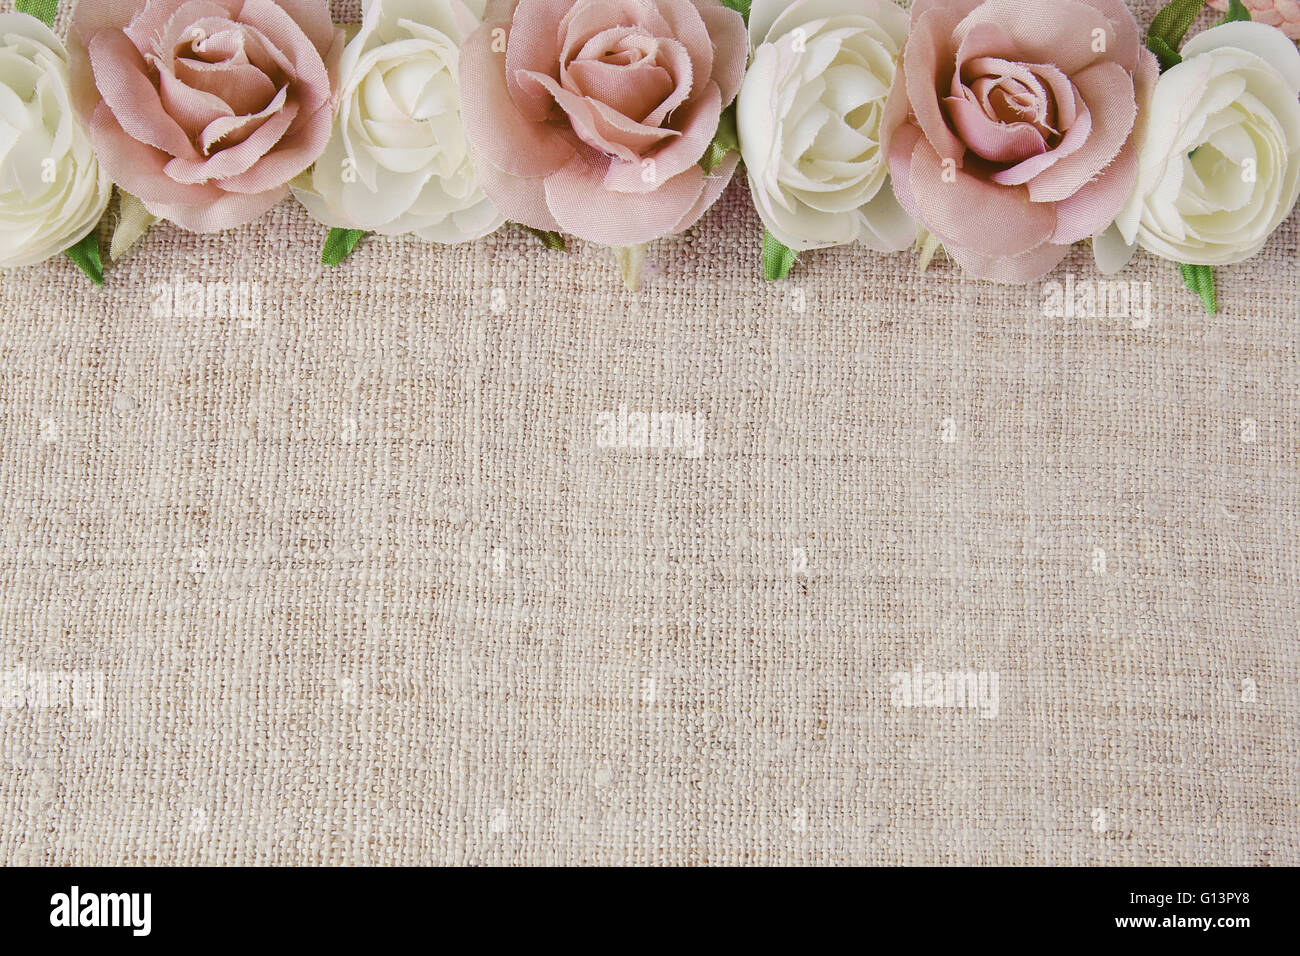 Artificial pink white rose flowers on linen, copy space background, selective focus, vintage tone Stock Photo